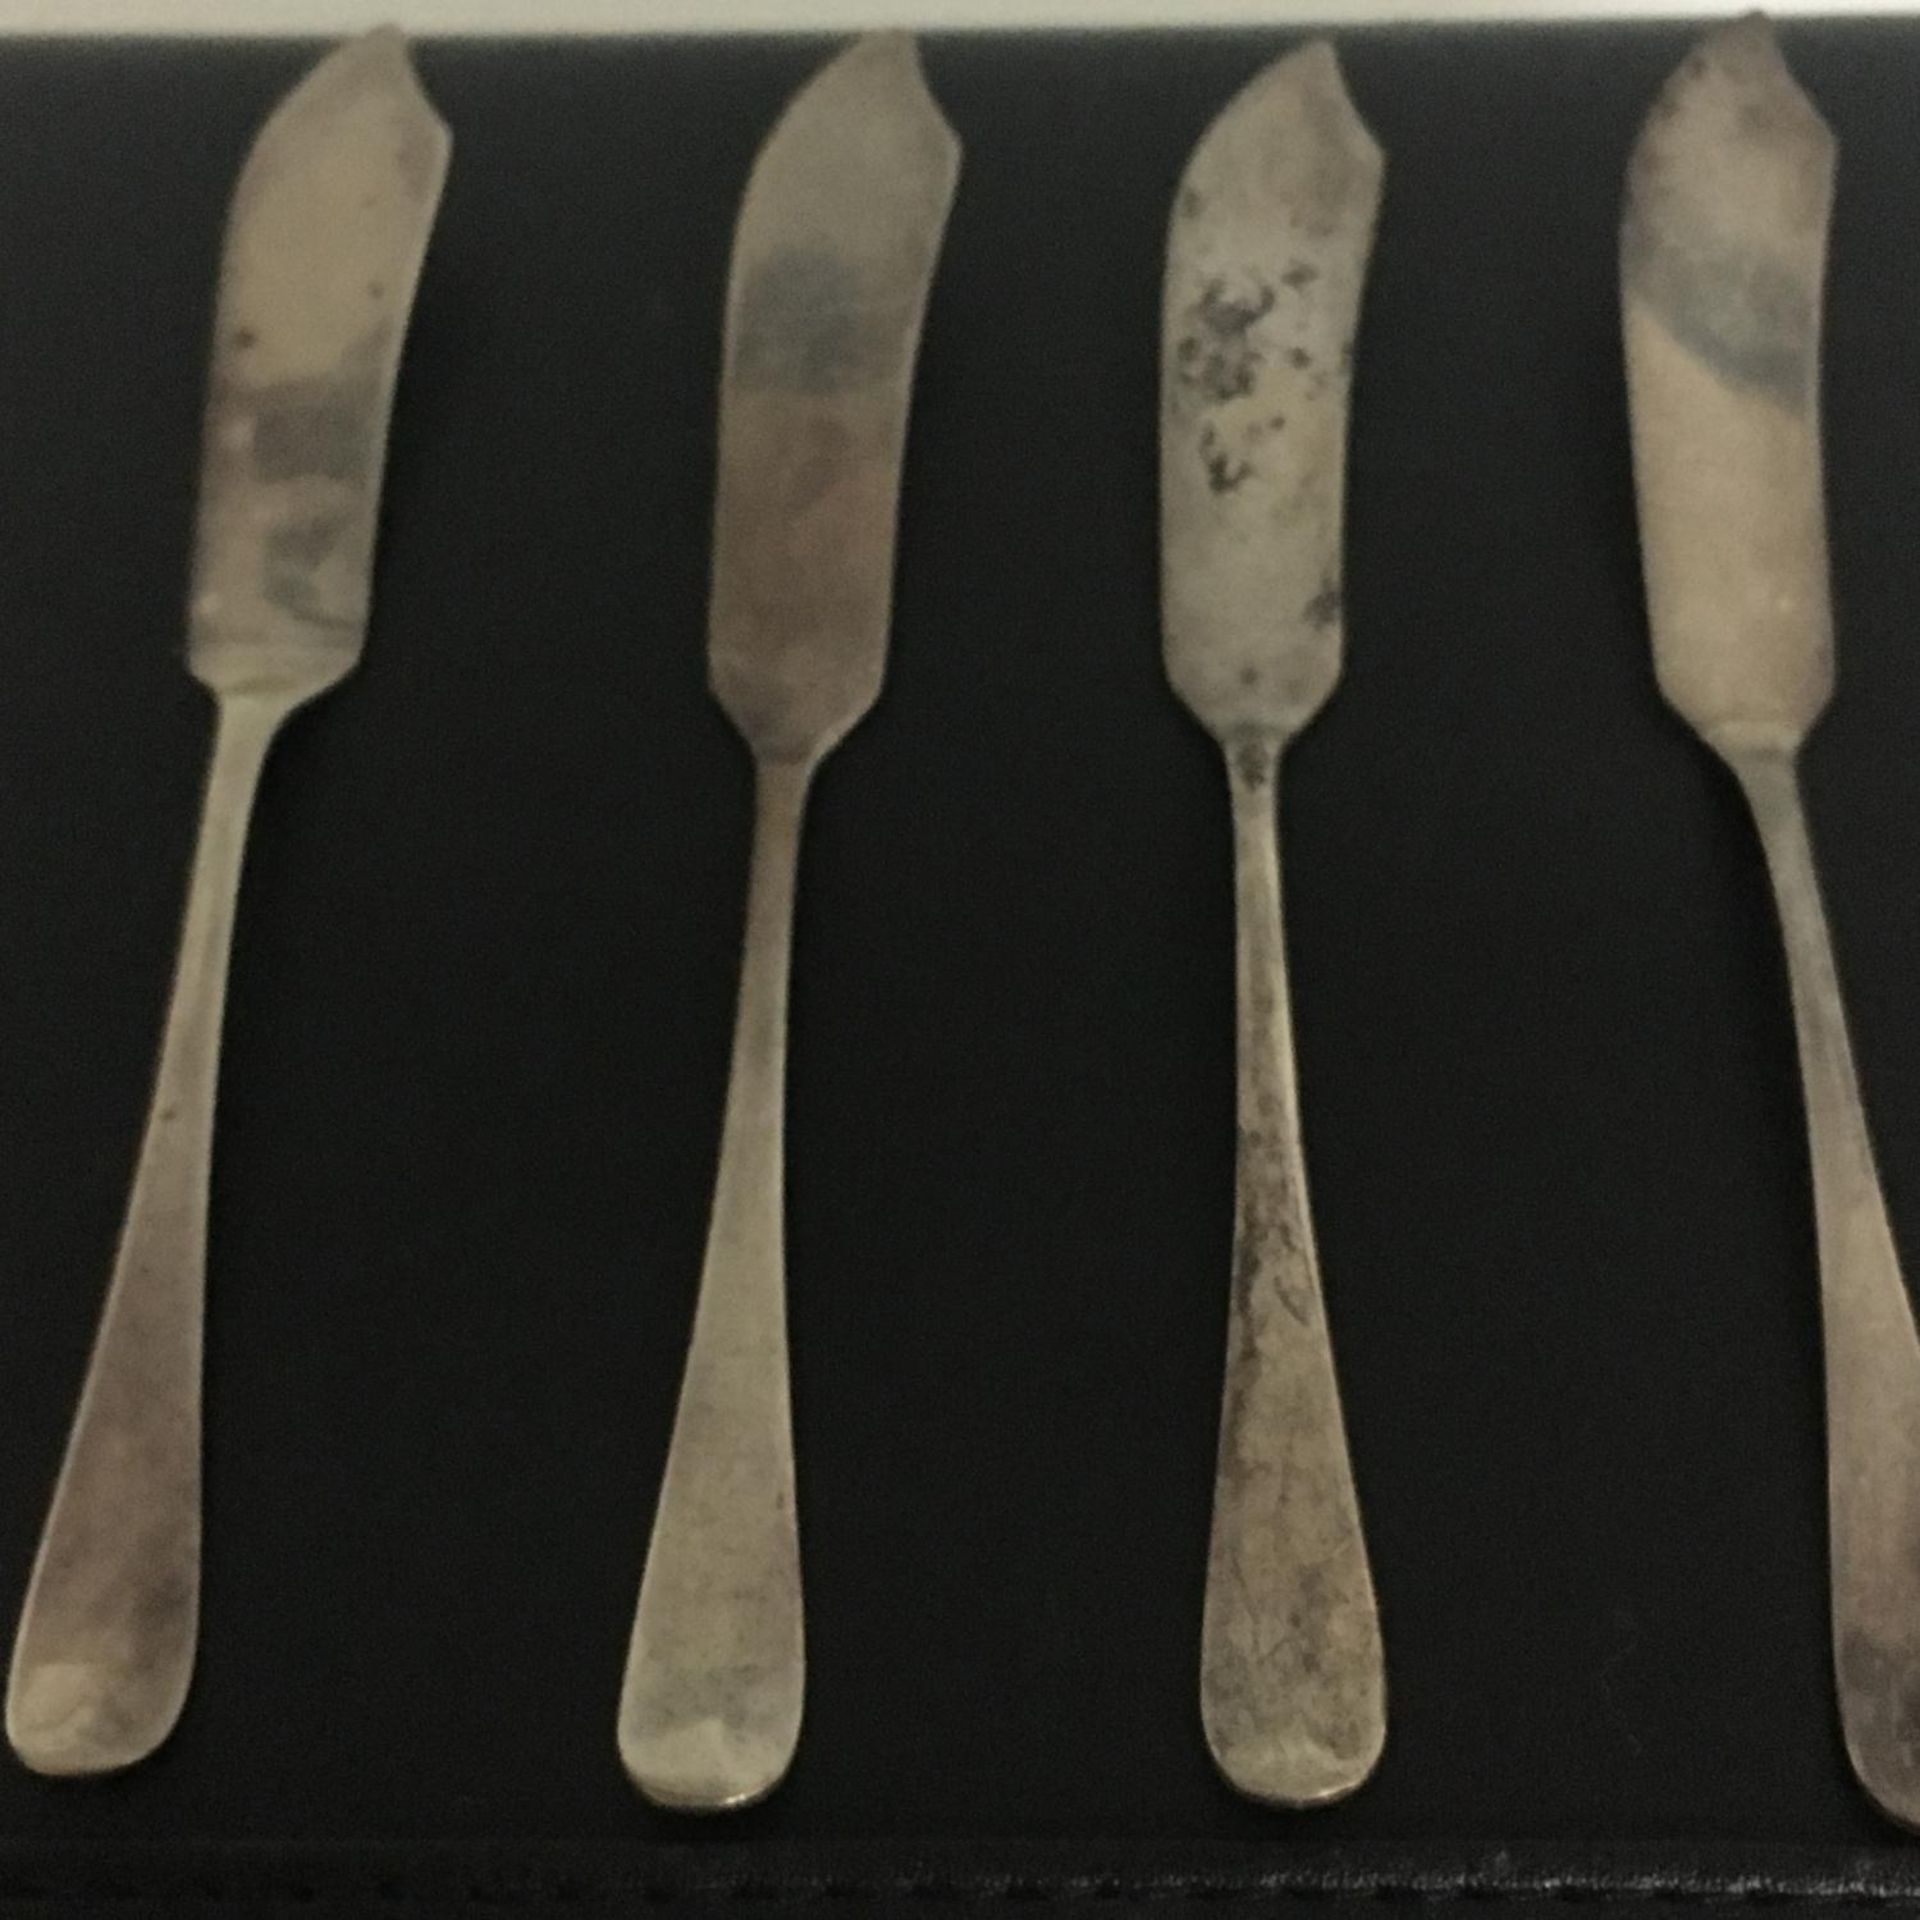 SET OF 4 HALLMARKED STERLING SILVER BUTTER SPREADERS OR CHEESE KNIVES. Made by Arthur Price & Co and